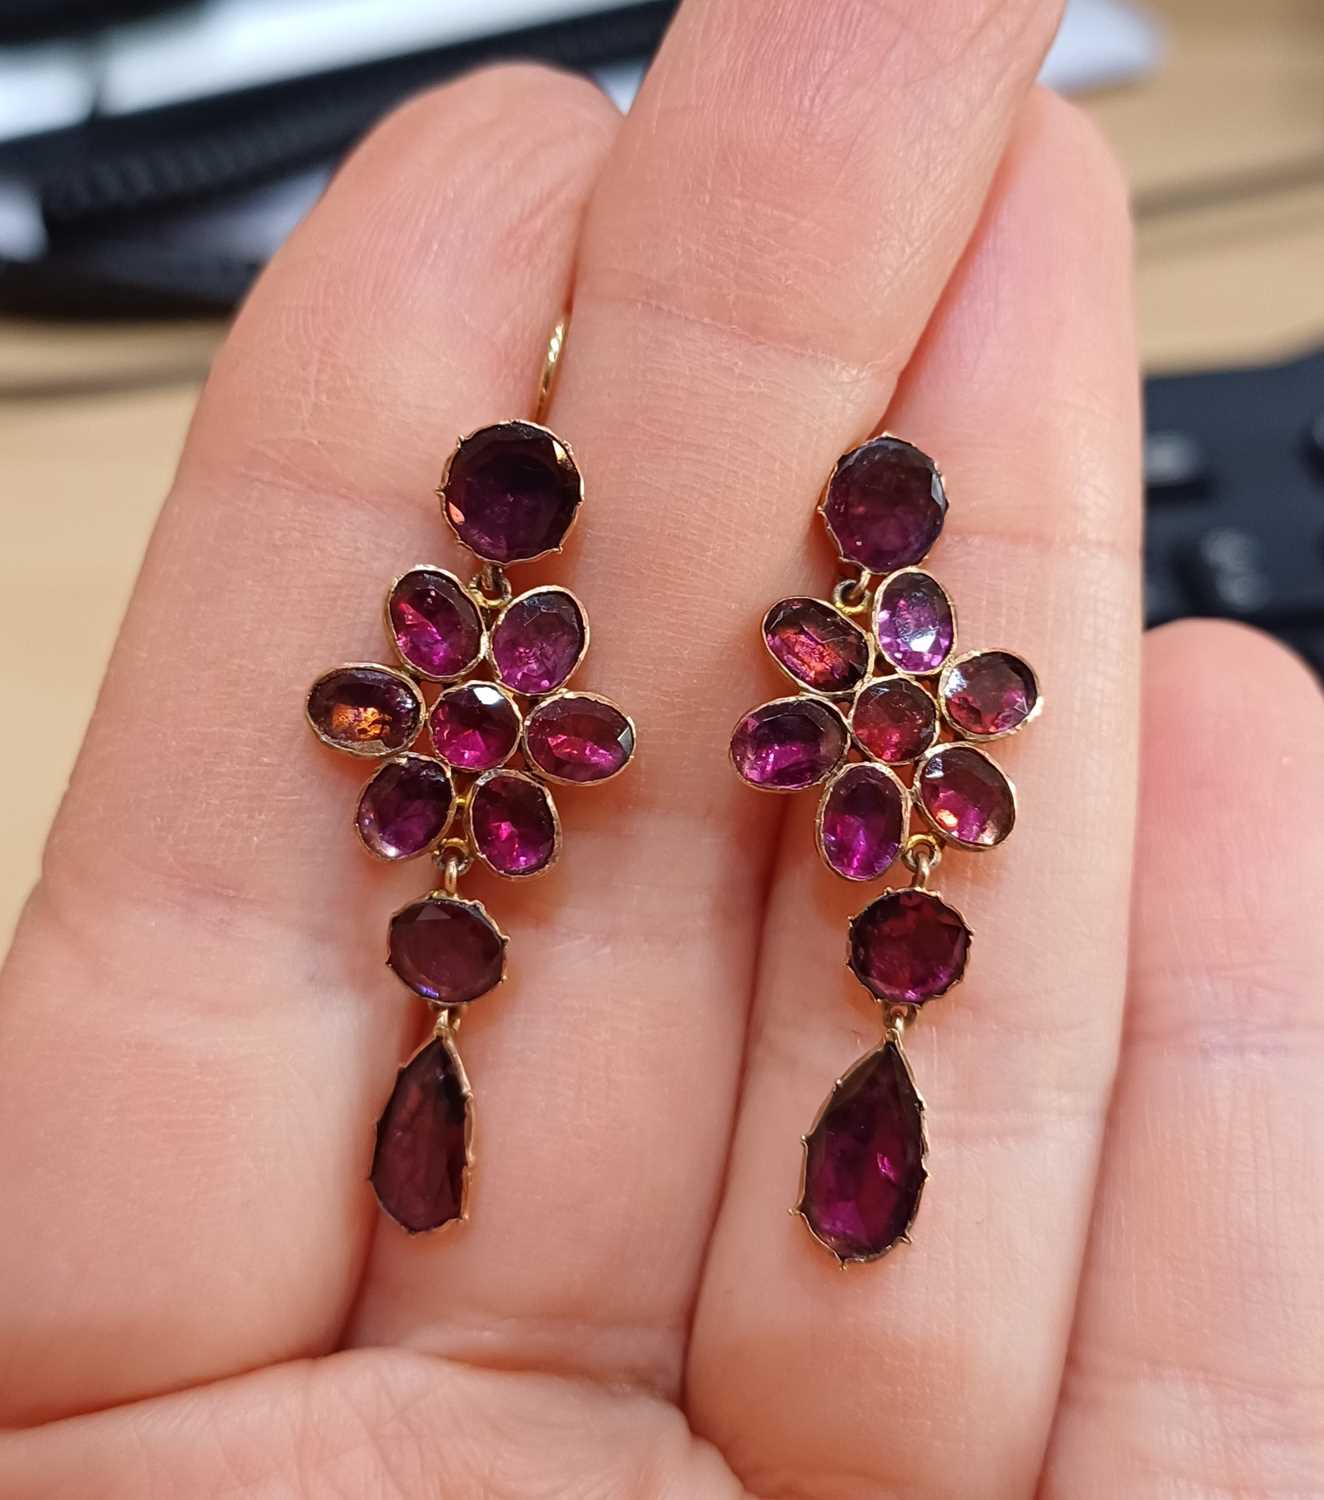 A Pair of Garnet Drop Earrings a round lasque cut garnet suspends a floral motif formed of round and - Image 3 of 3